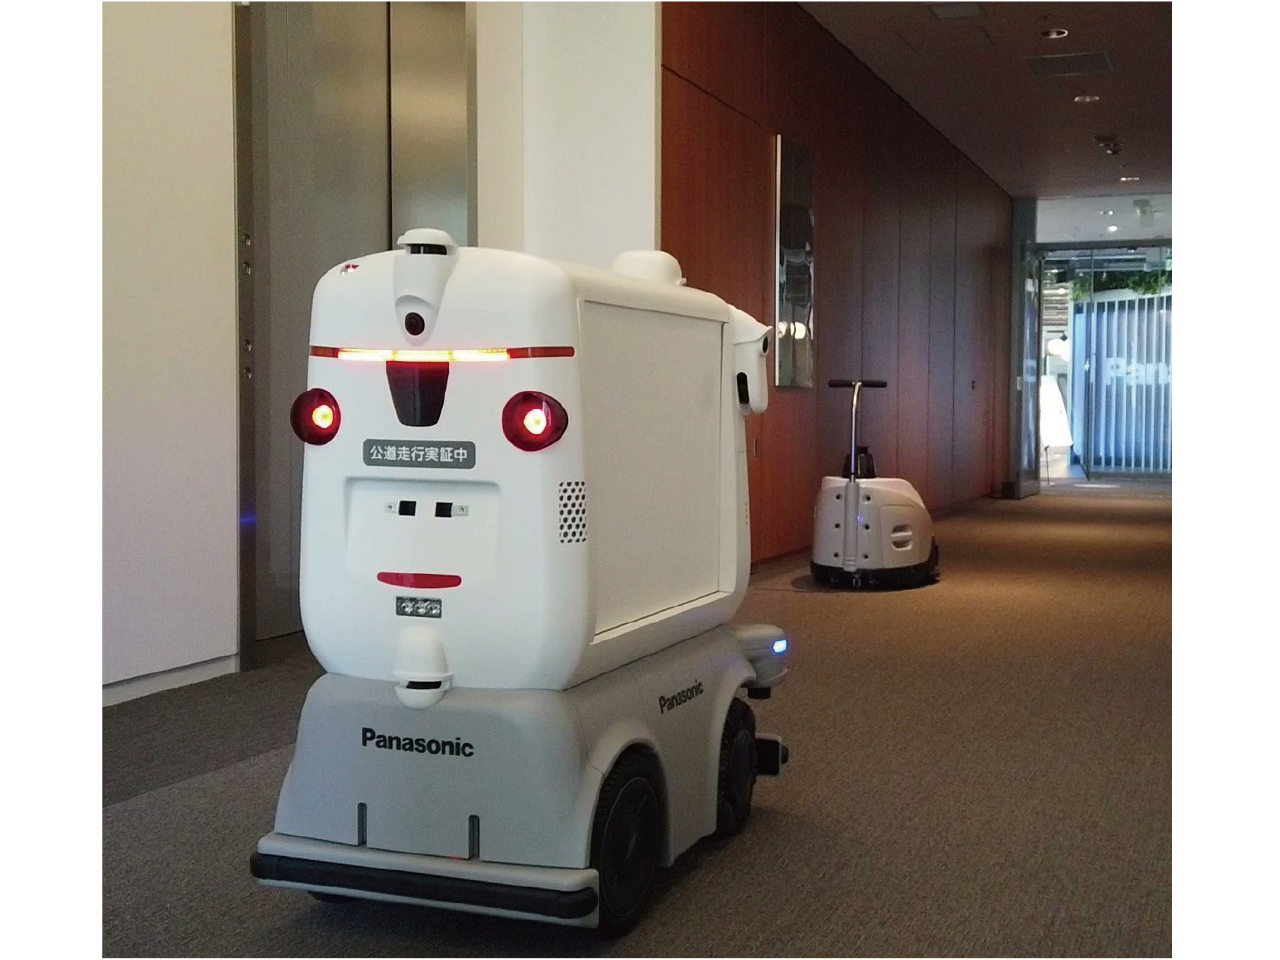 A transport robot and a cleaning robot are running automatically through the passage in the building.